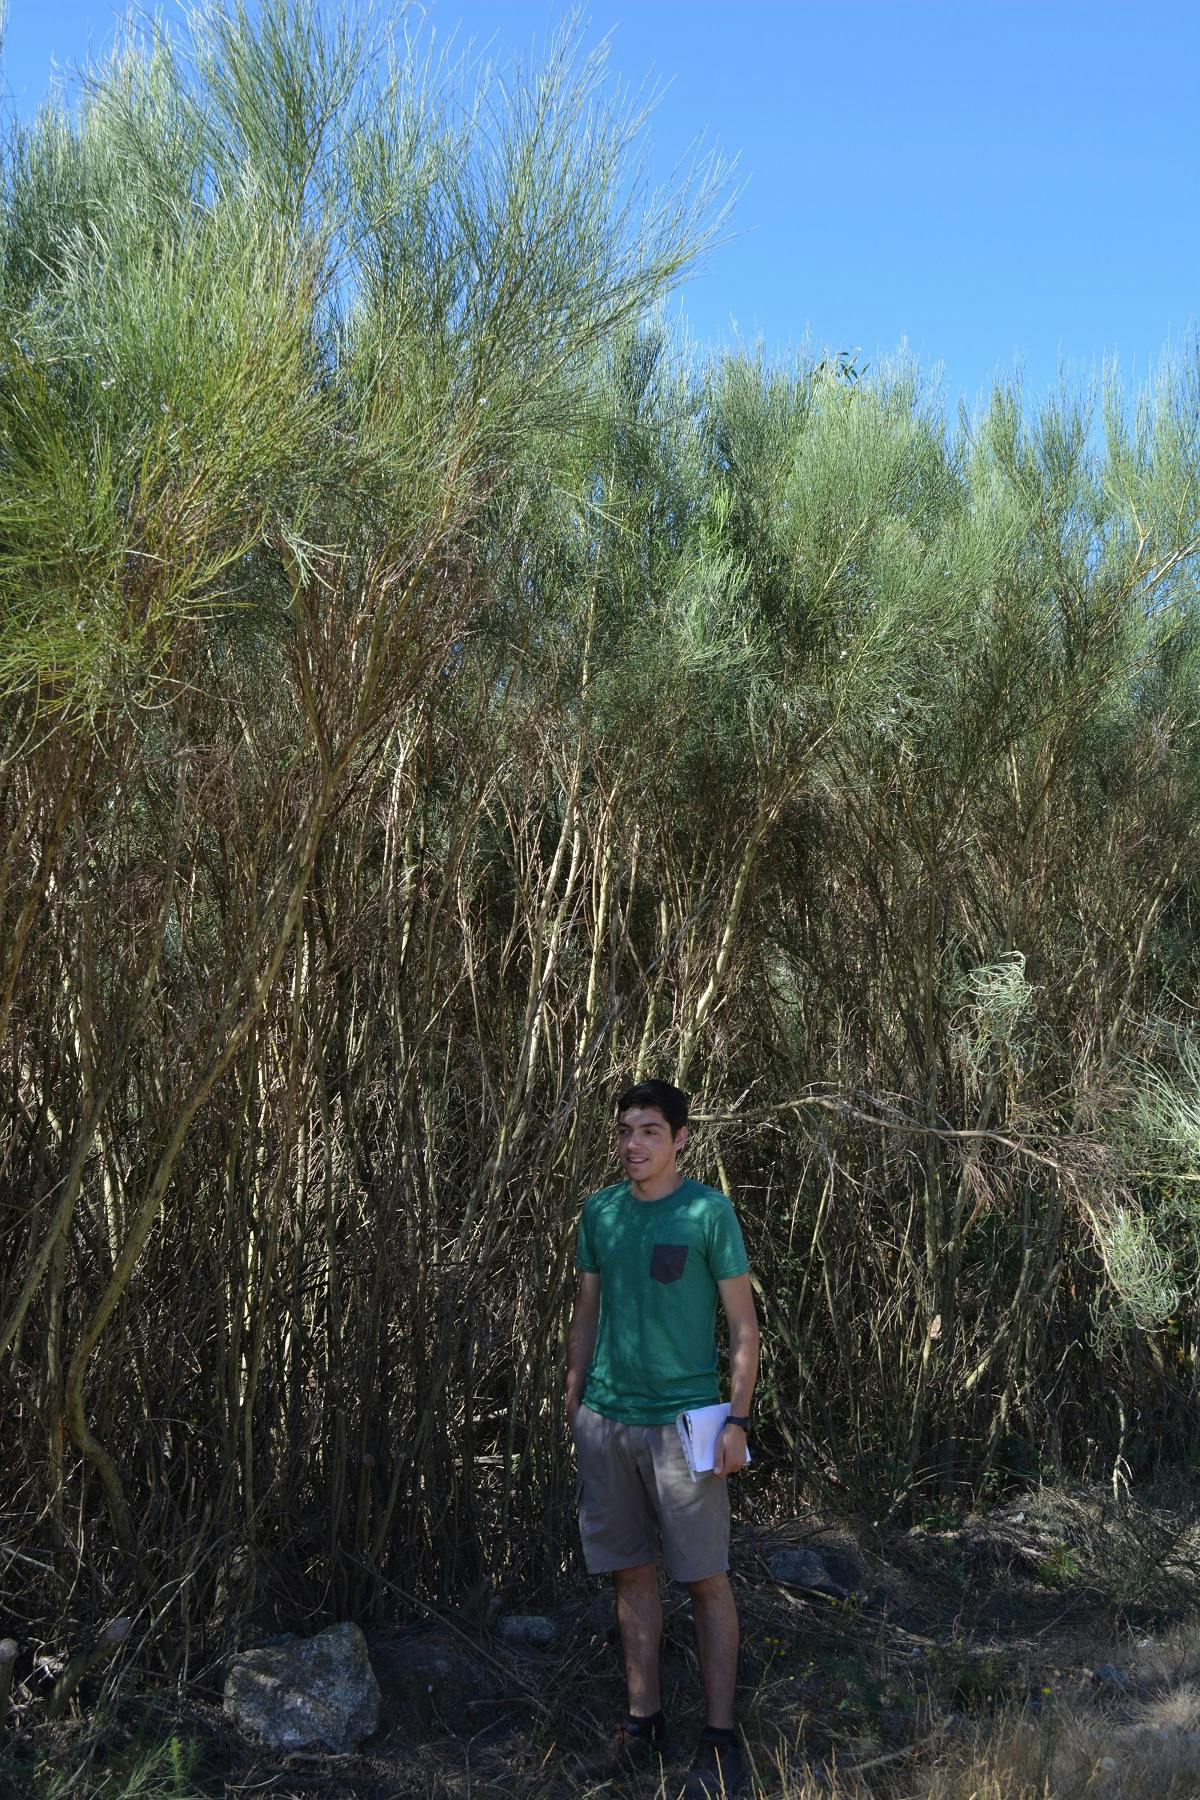 A forest engineer stands next to 3 metre tall Portuguese broom. This dominant, dry dense species is perfect fuel for Portugal's wildfires.